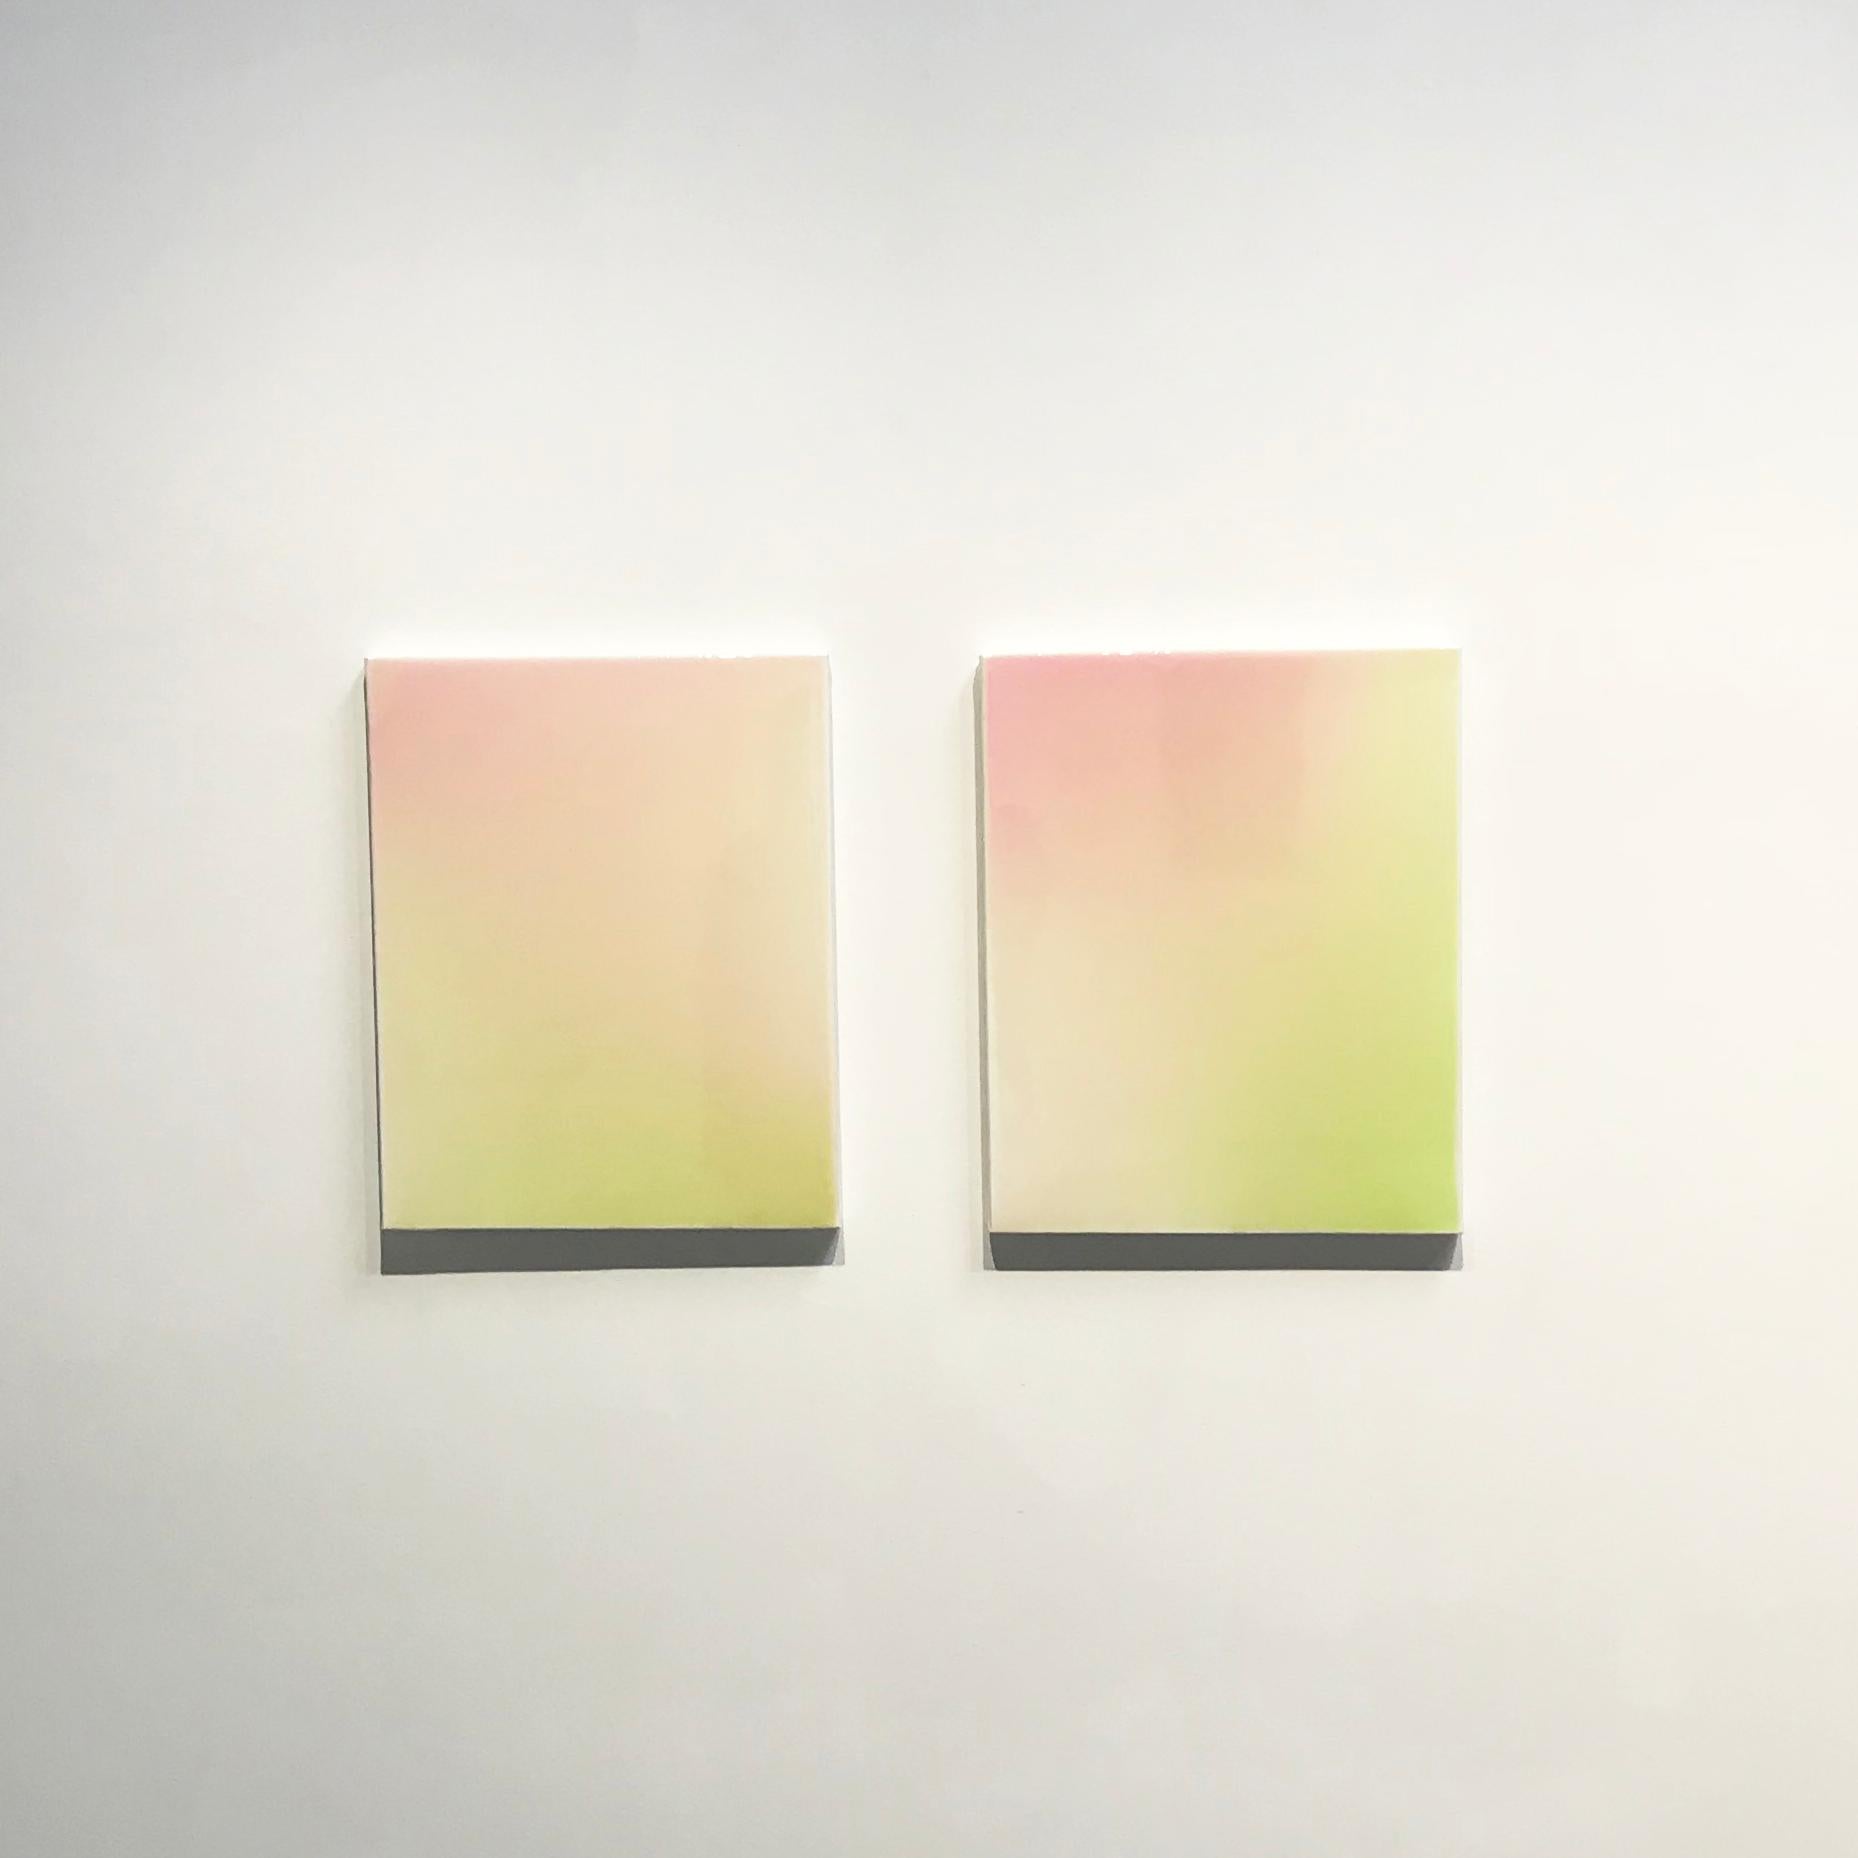 The work of Gilles Teboul is a perfect hybridization of elements as diverse as the minimalist aesthetic of artists such as John McCracken and Dan Flavin, and the delicate shading and fluorescent colors of the OS X. His ordered, shiny, lacquered